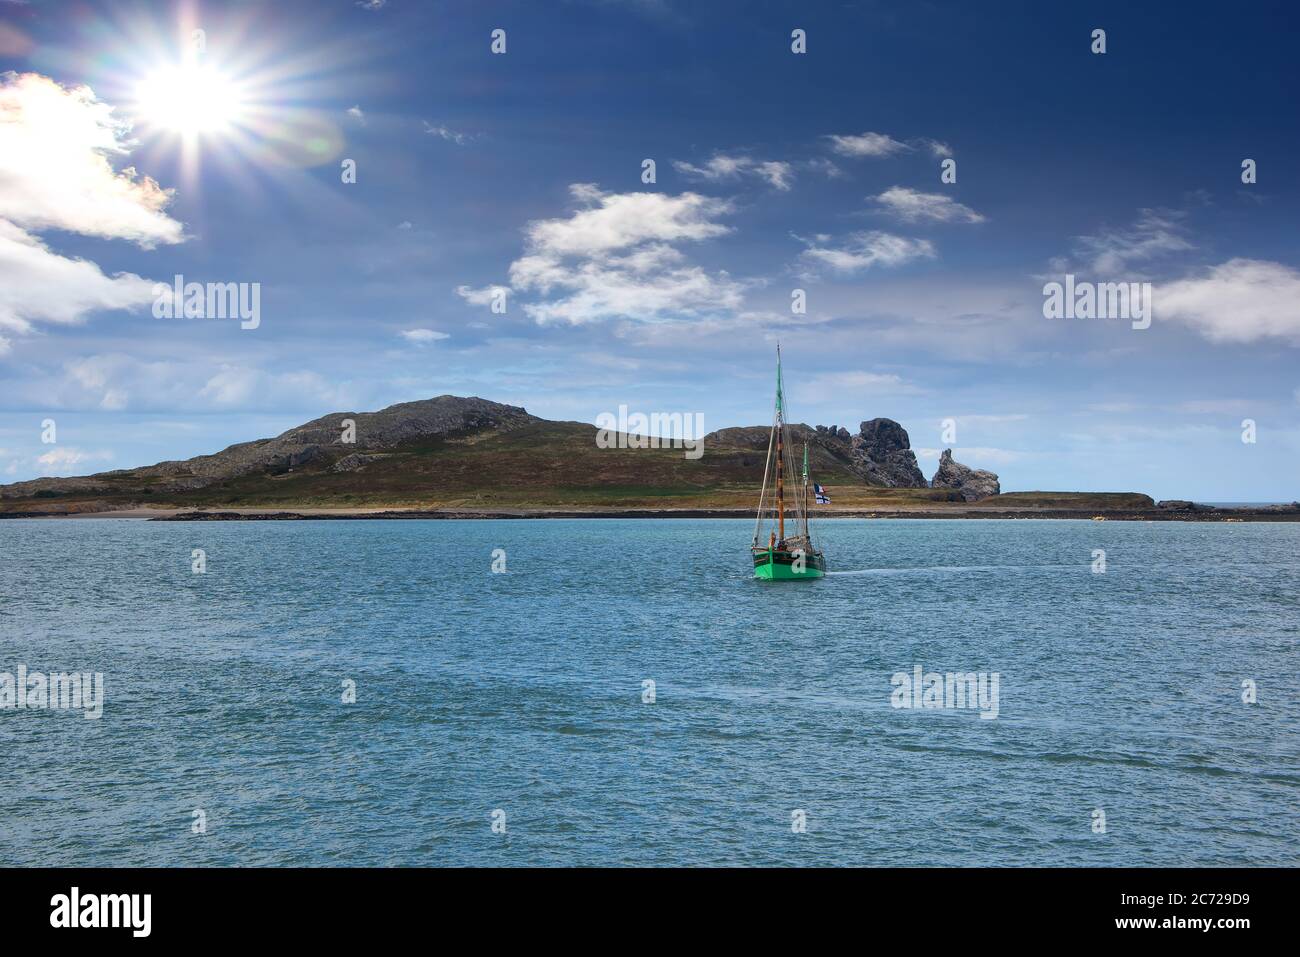 Large boat sailing on the Howth Peninsula near the fishing village of Howth. Stock Photo